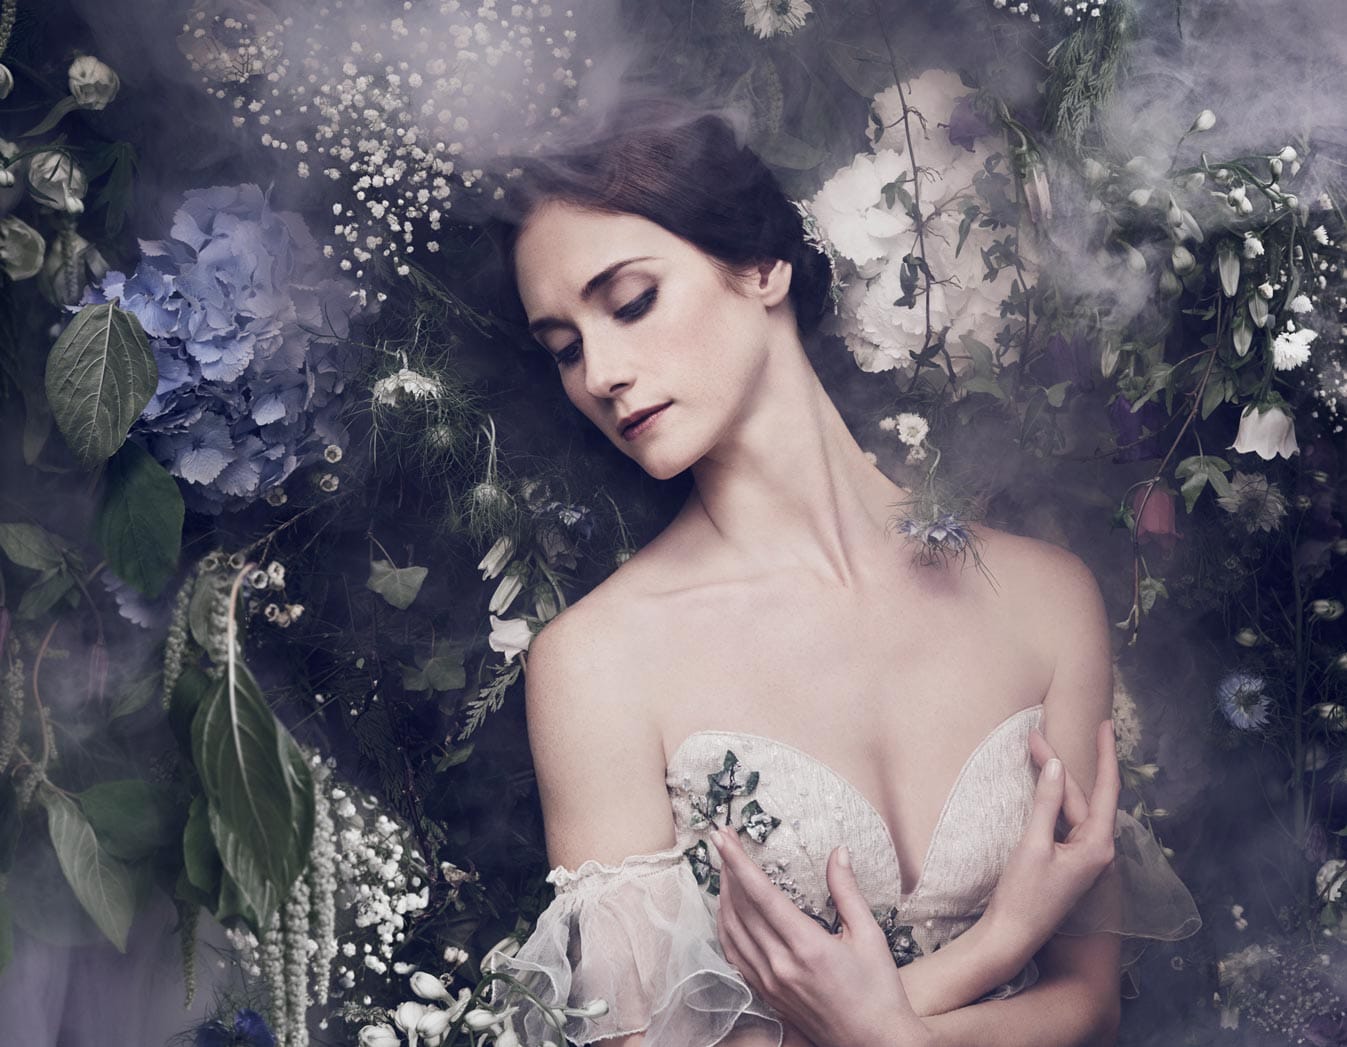 A dancer playing the role of Giselle is shown from the chest up over a Romantic woodland background. She is holding her arms on her chest and looking down while wearing a white dress.